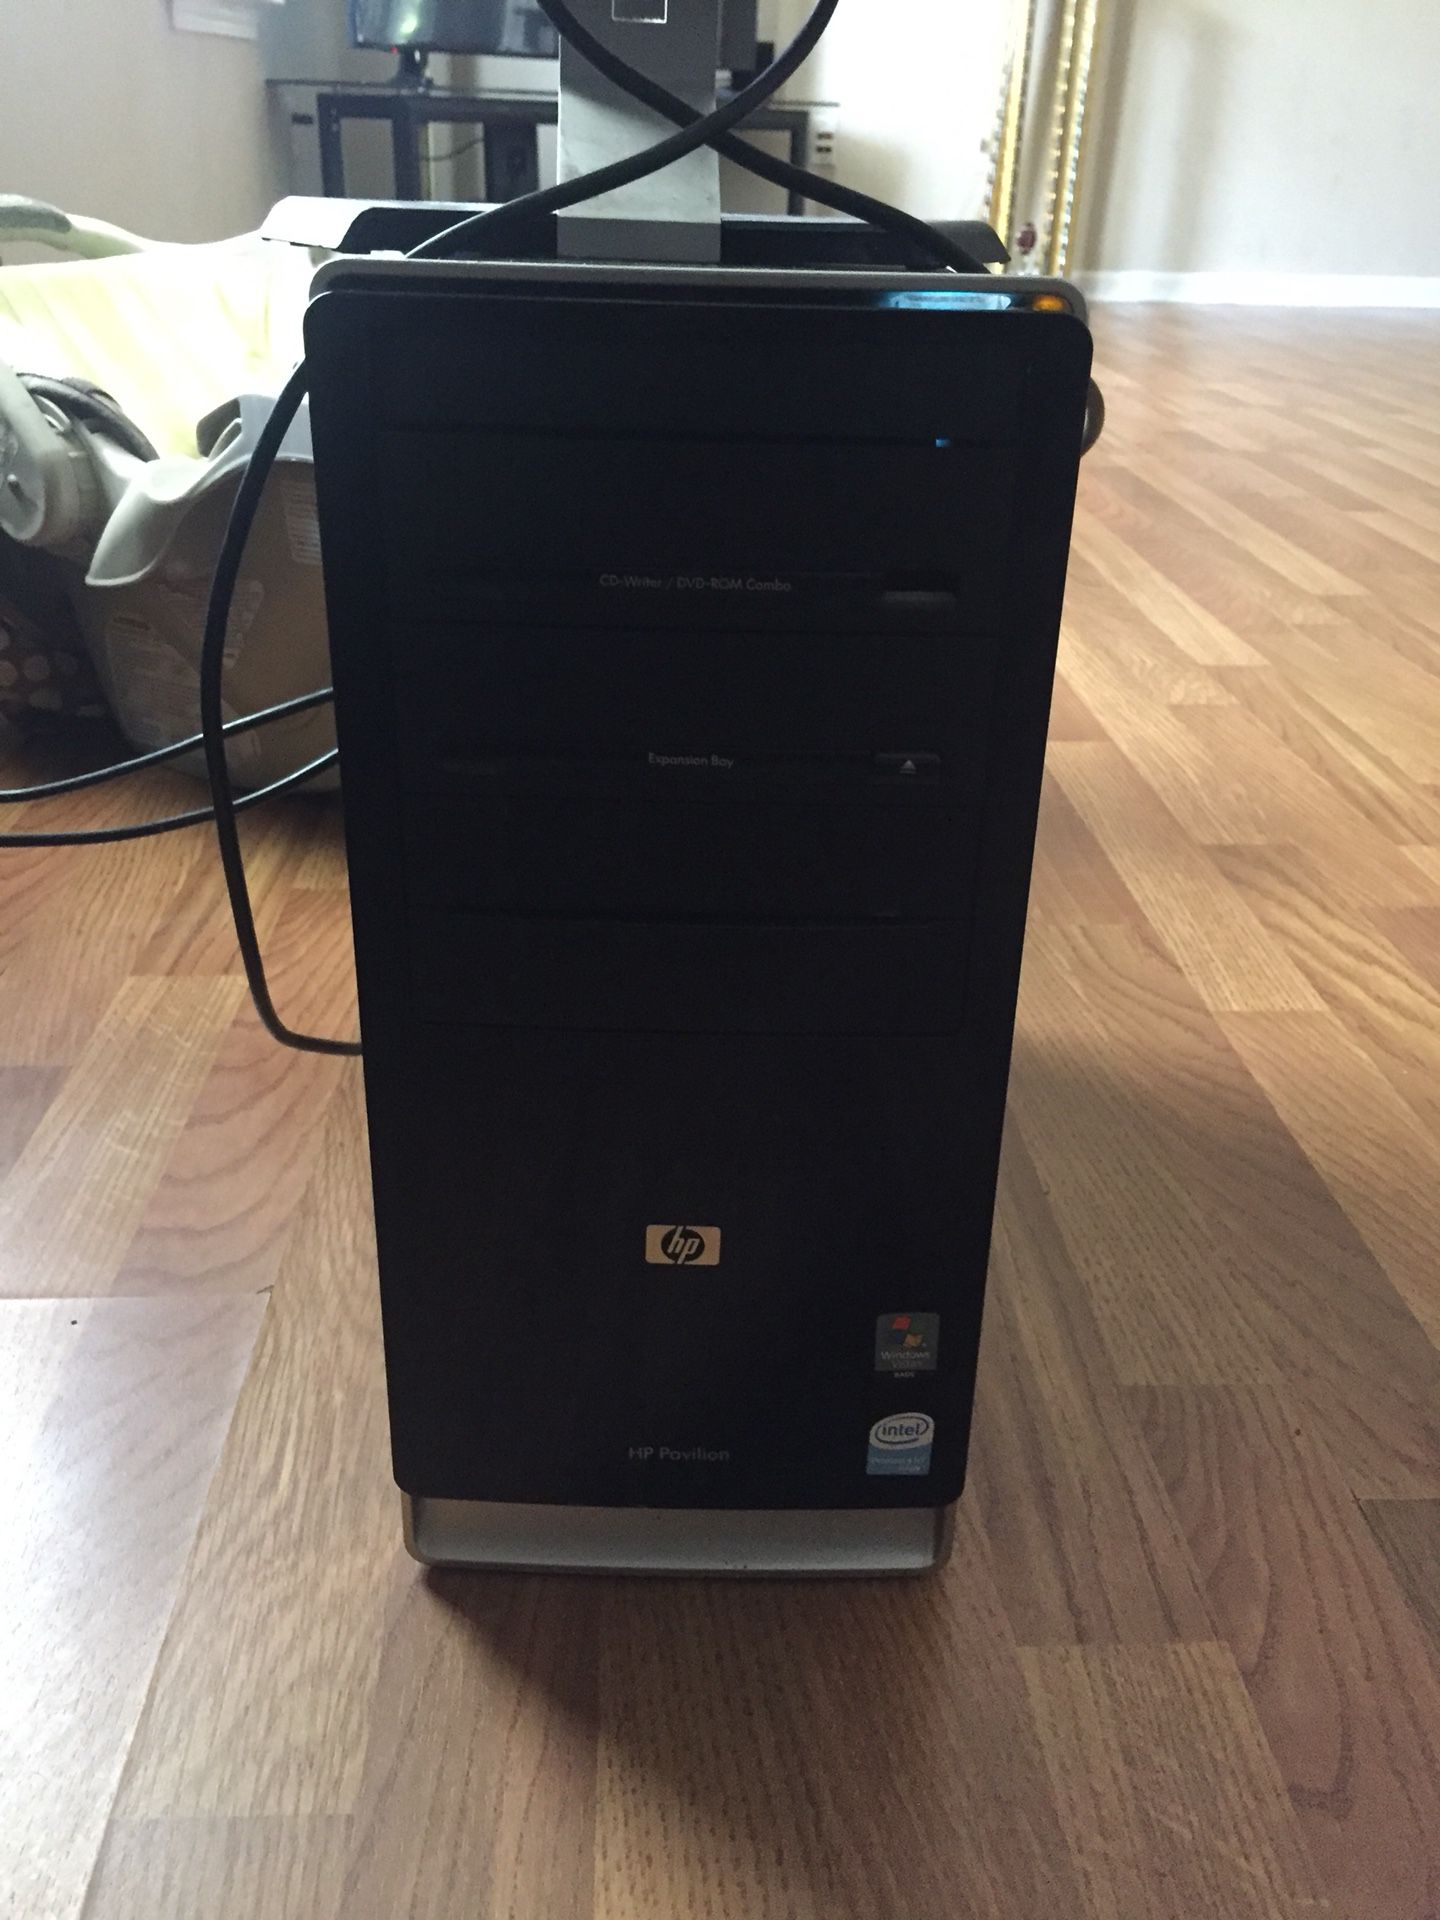 Computer, 14” Monitor,and printer for sale needs key board